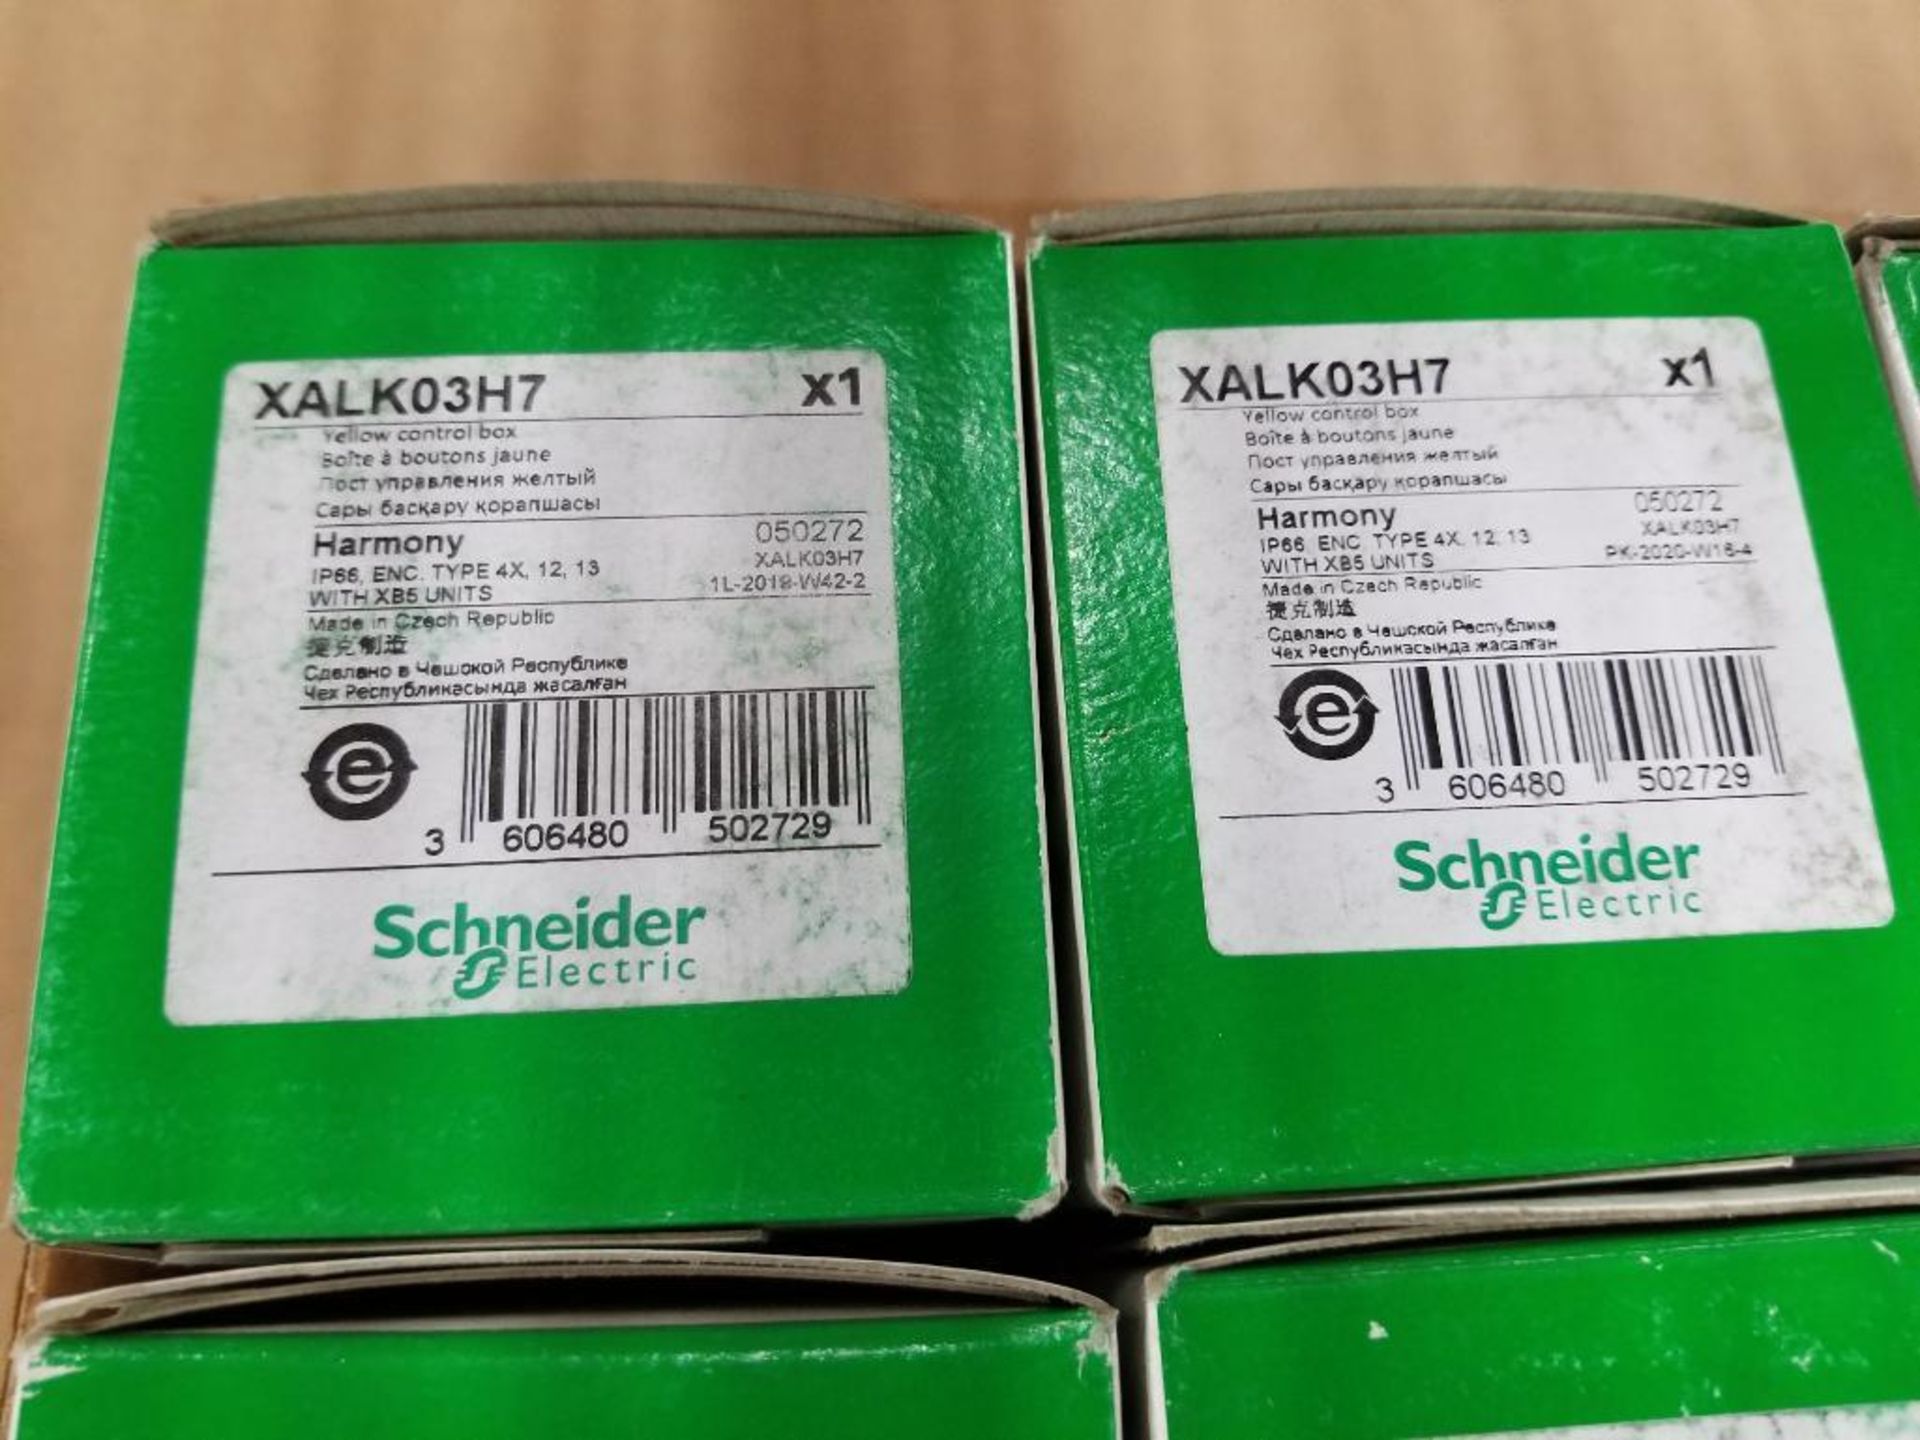 Qty 12 - Schneider Electric XALK03H7 Yellow control box. New in box. - Image 2 of 7